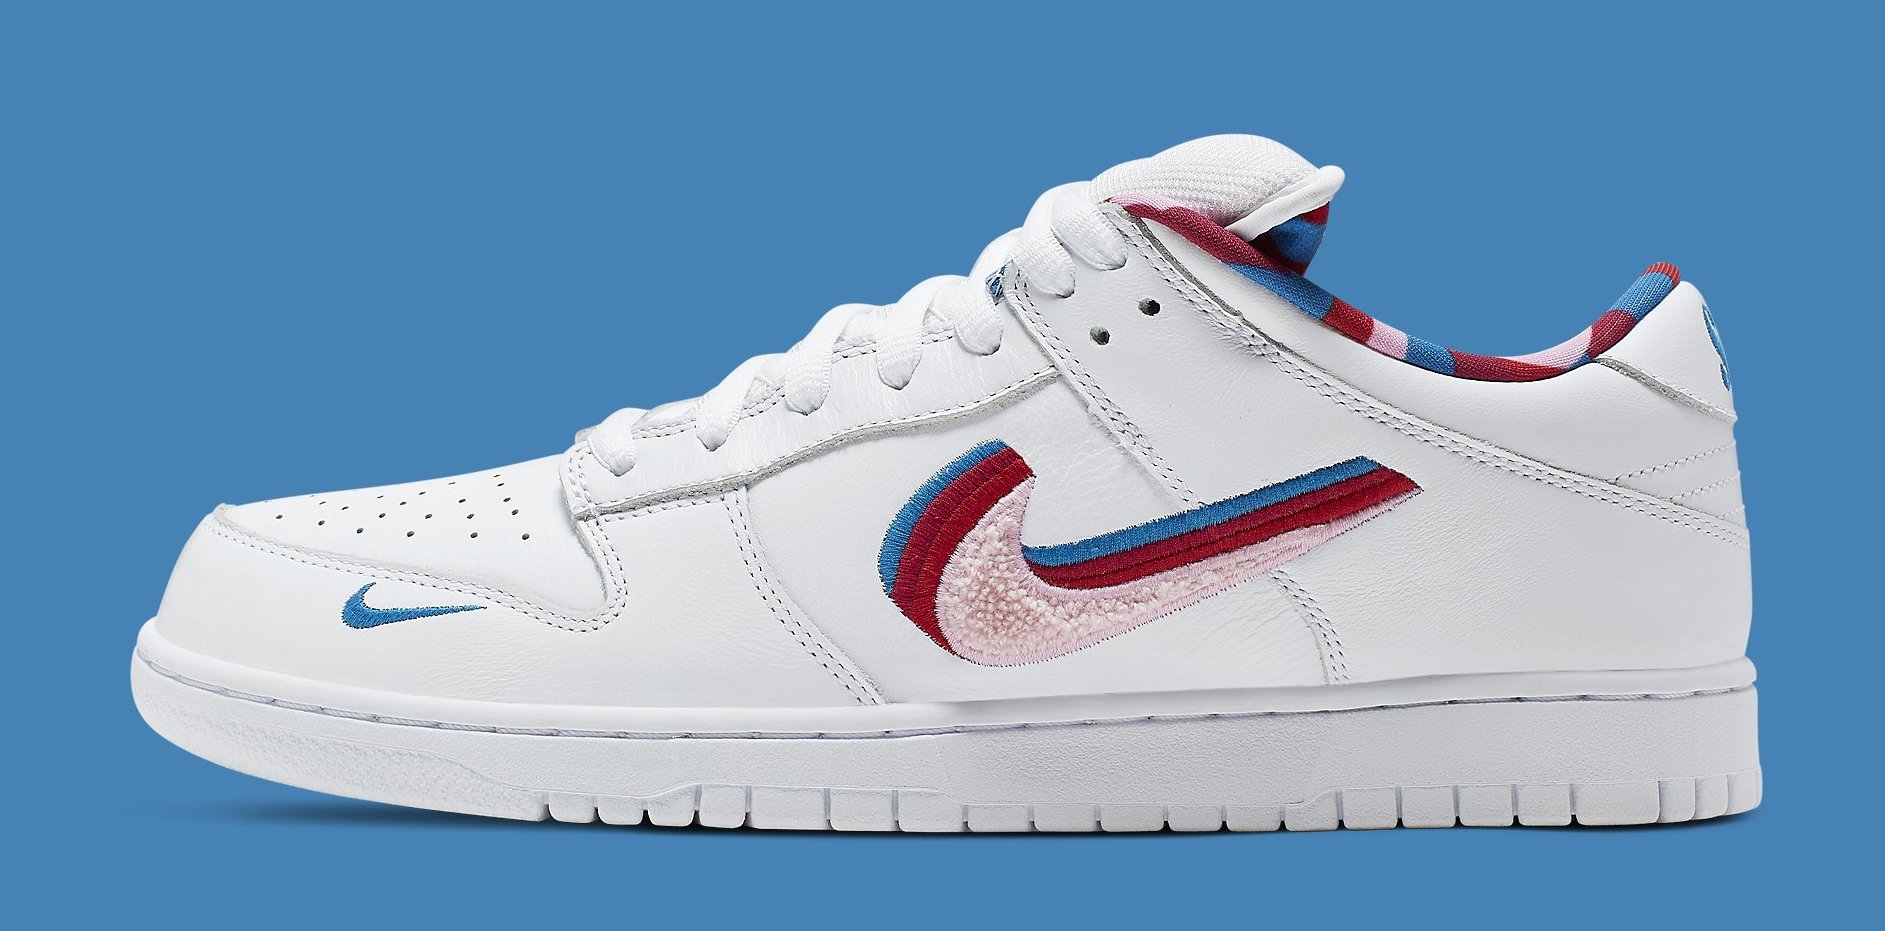 Parra x Nike SB Dunk Low CN4504 100 Lateral